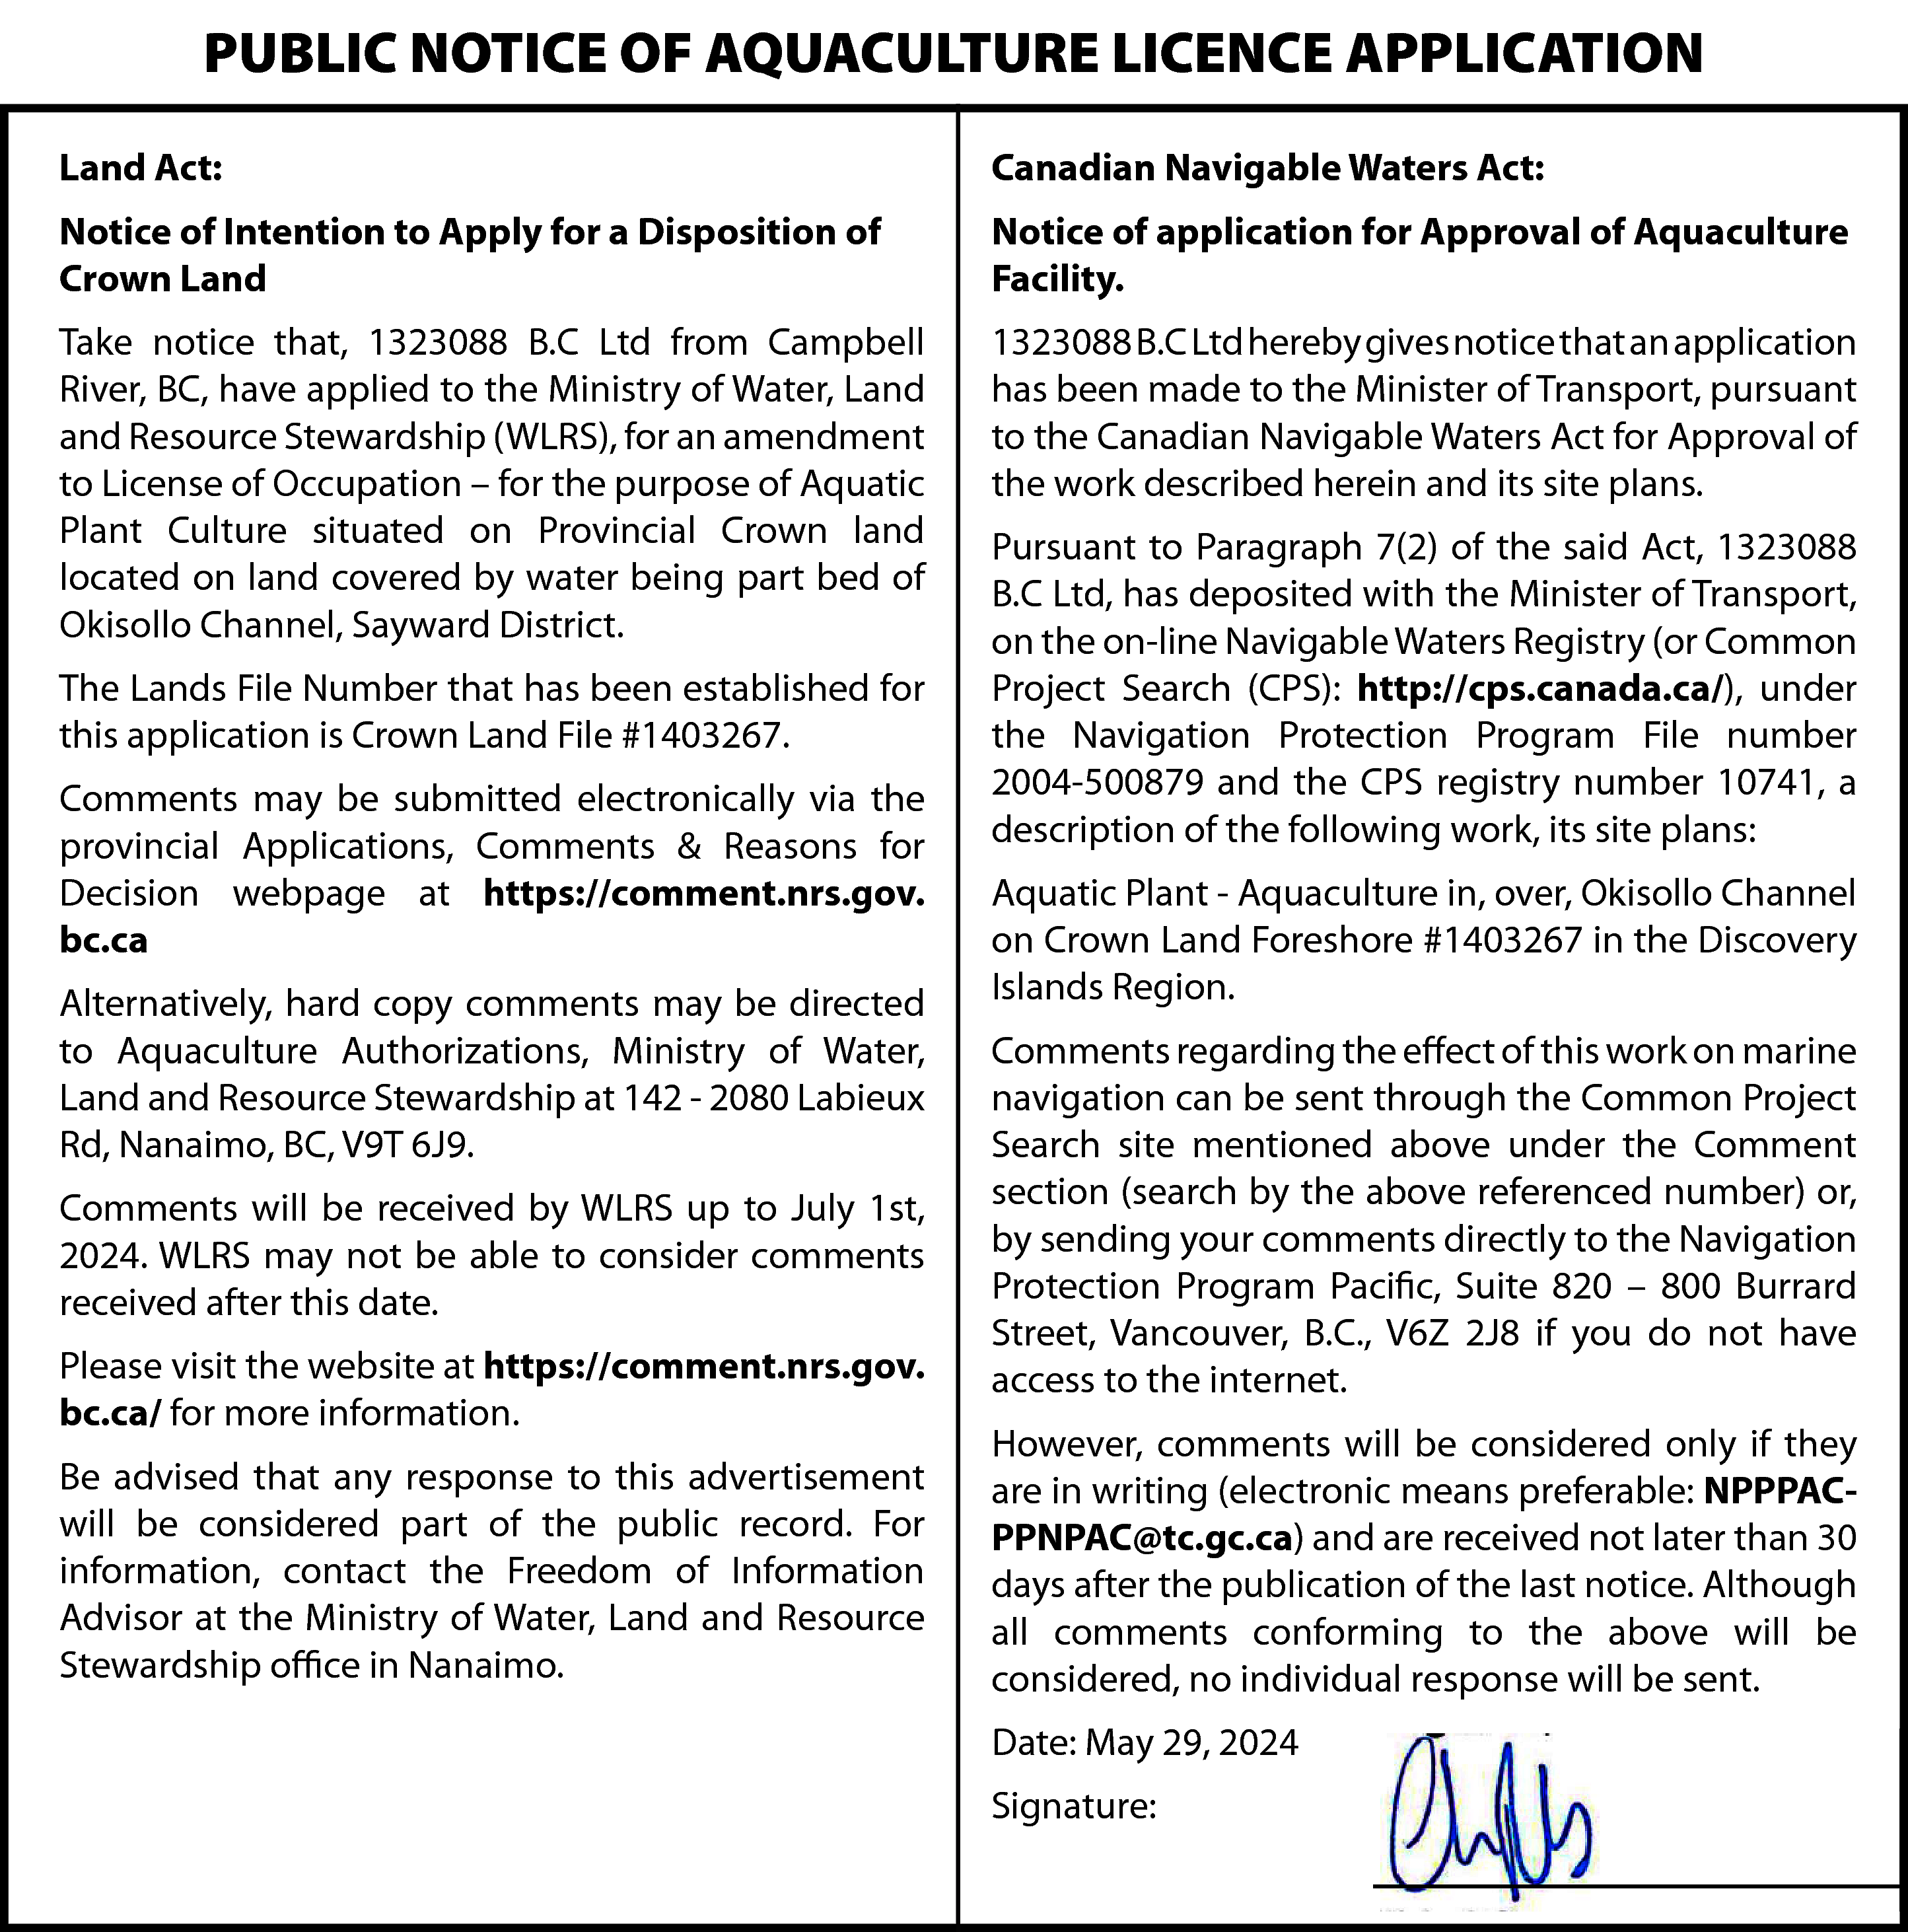 PUBLIC NOTICE OF AQUACULTURE LICENCE  PUBLIC NOTICE OF AQUACULTURE LICENCE APPLICATION  Land Act:    Canadian Navigable Waters Act:    Notice of Intention to Apply for a Disposition of  Crown Land    Notice of application for Approval of Aquaculture  Facility.    Take notice that, 1323088 B.C Ltd from Campbell  River, BC, have applied to the Ministry of Water, Land  and Resource Stewardship (WLRS), for an amendment  to License of Occupation – for the purpose of Aquatic  Plant Culture situated on Provincial Crown land  located on land covered by water being part bed of  Okisollo Channel, Sayward District.    1323088 B.C Ltd hereby gives notice that an application  has been made to the Minister of Transport, pursuant  to the Canadian Navigable Waters Act for Approval of  the work described herein and its site plans.    The Lands File Number that has been established for  this application is Crown Land File #1403267.  Comments may be submitted electronically via the  provincial Applications, Comments & Reasons for  Decision webpage at https://comment.nrs.gov.  bc.ca  Alternatively, hard copy comments may be directed  to Aquaculture Authorizations, Ministry of Water,  Land and Resource Stewardship at 142 - 2080 Labieux  Rd, Nanaimo, BC, V9T 6J9.  Comments will be received by WLRS up to July 1st,  2024. WLRS may not be able to consider comments  received after this date.  Please visit the website at https://comment.nrs.gov.  bc.ca/ for more information.  Be advised that any response to this advertisement  will be considered part of the public record. For  information, contact the Freedom of Information  Advisor at the Ministry of Water, Land and Resource  Stewardship office in Nanaimo.    Pursuant to Paragraph 7(2) of the said Act, 1323088  B.C Ltd, has deposited with the Minister of Transport,  on the on-line Navigable Waters Registry (or Common  Project Search (CPS): http://cps.canada.ca/), under  the Navigation Protection Program File number  2004-500879 and the CPS registry number 10741, a  description of the following work, its site plans:  Aquatic Plant - Aquaculture in, over, Okisollo Channel  on Crown Land Foreshore #1403267 in the Discovery  Islands Region.  Comments regarding the effect of this work on marine  navigation can be sent through the Common Project  Search site mentioned above under the Comment  section (search by the above referenced number) or,  by sending your comments directly to the Navigation  Protection Program Pacific, Suite 820 – 800 Burrard  Street, Vancouver, B.C., V6Z 2J8 if you do not have  access to the internet.  However, comments will be considered only if they  are in writing (electronic means preferable: NPPPACPPNPAC@tc.gc.ca) and are received not later than 30  days after the publication of the last notice. Although  all comments conforming to the above will be  considered, no individual response will be sent.  Date: May 29, 2024  Signature:    